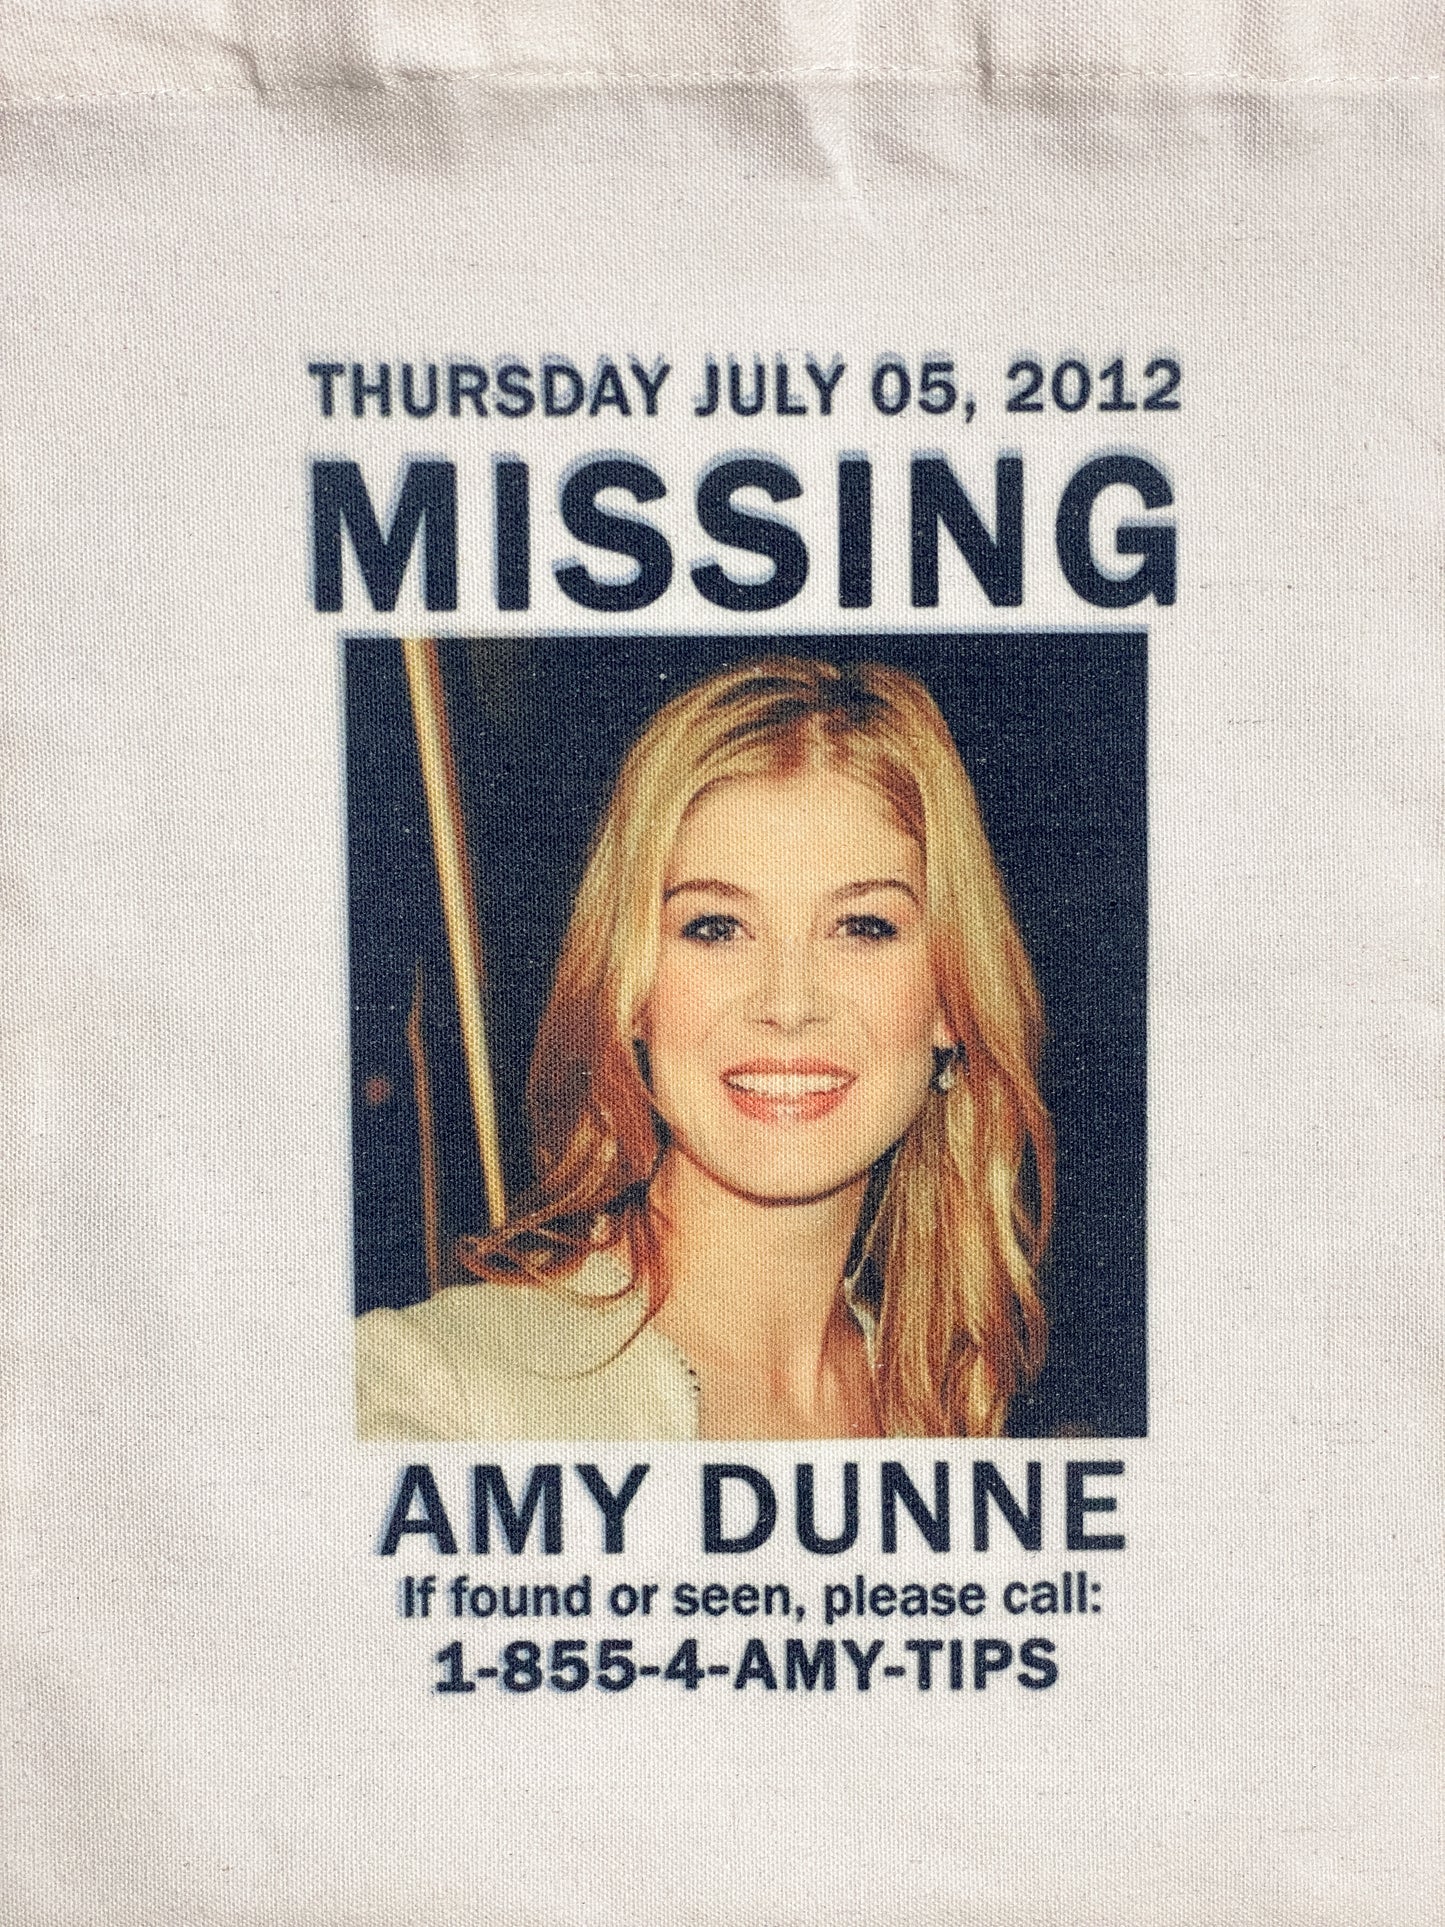 Amy Dunne Tote Bag